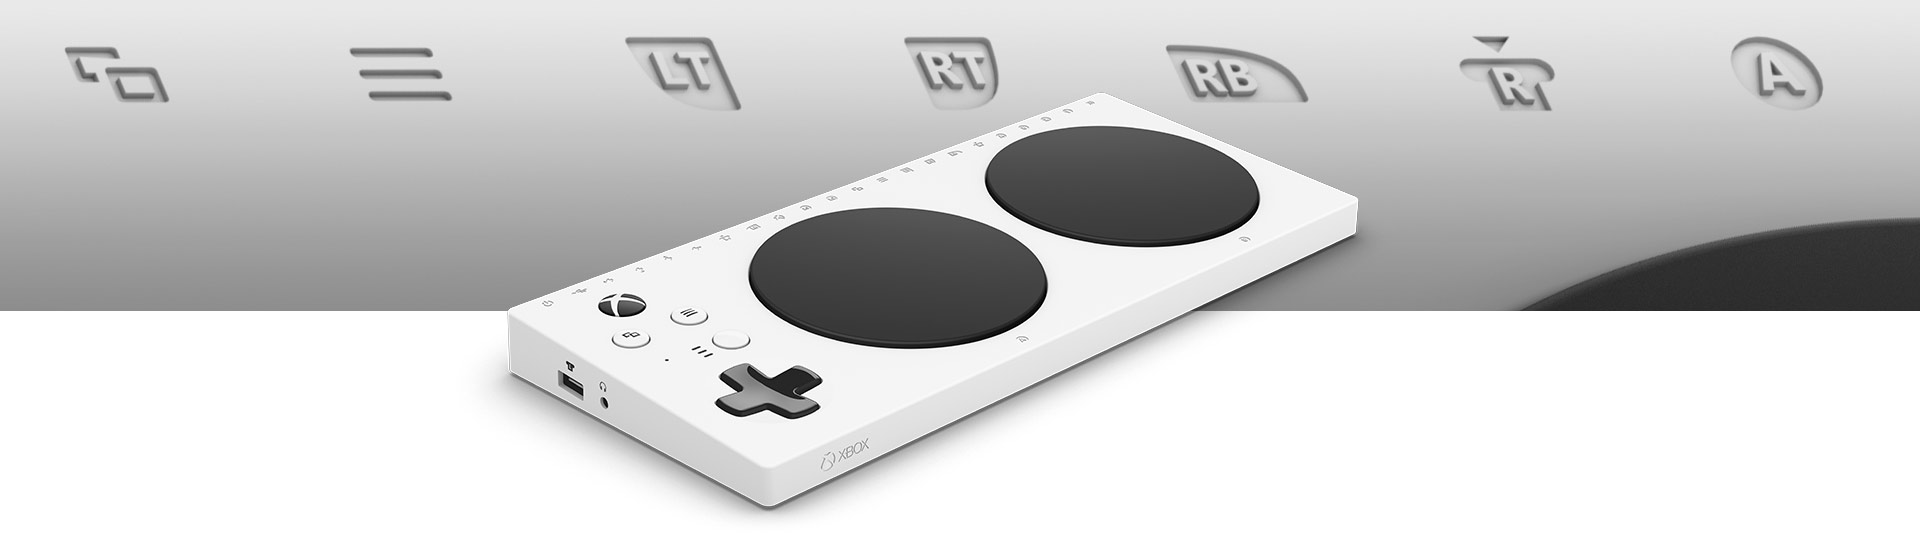 adaptive video game controllers